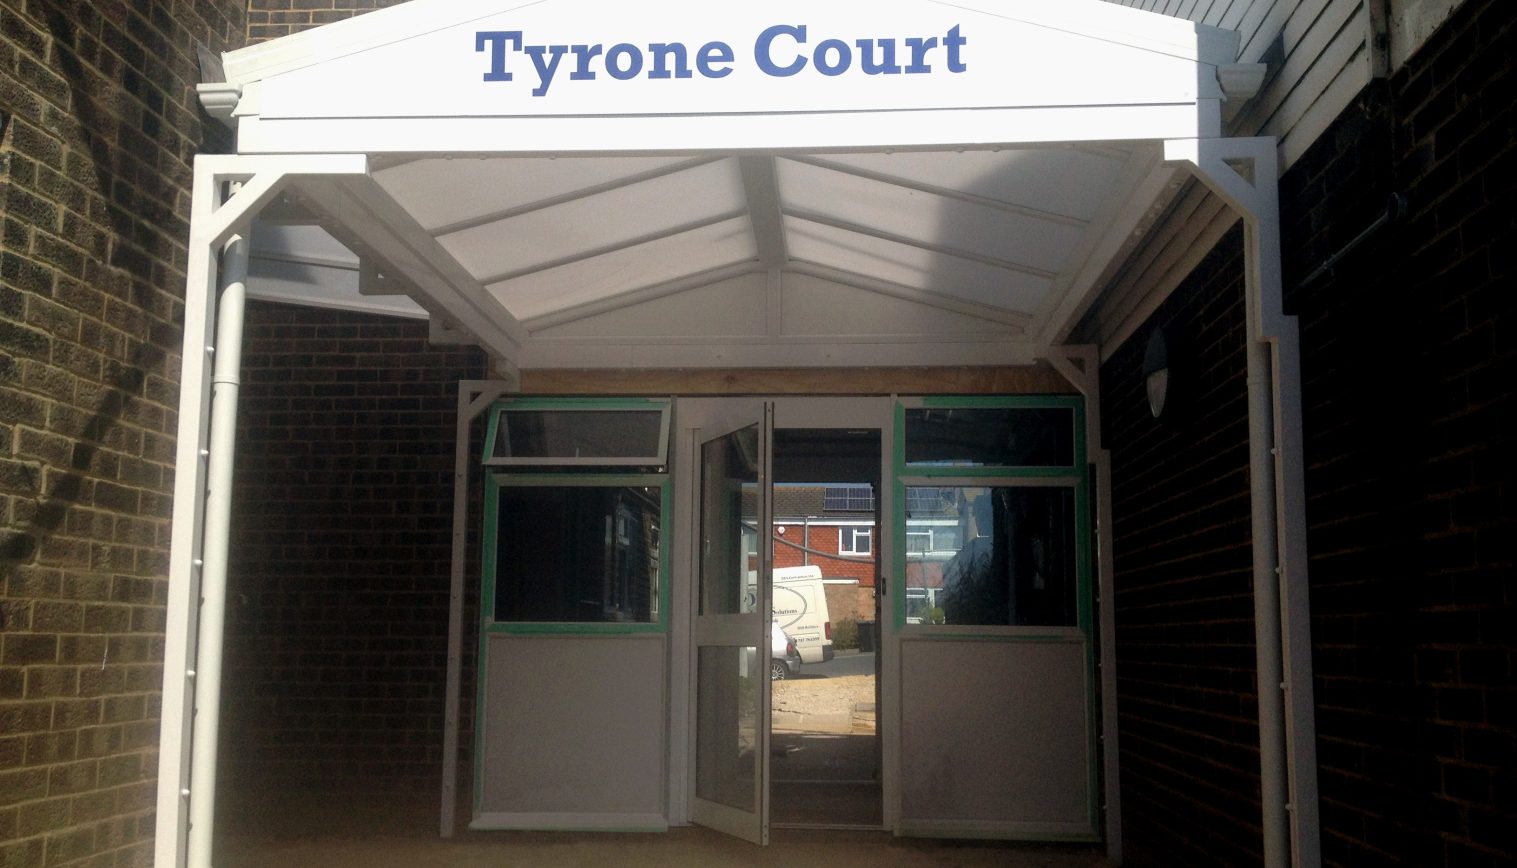 Tyrone Court – Entrance Canopy